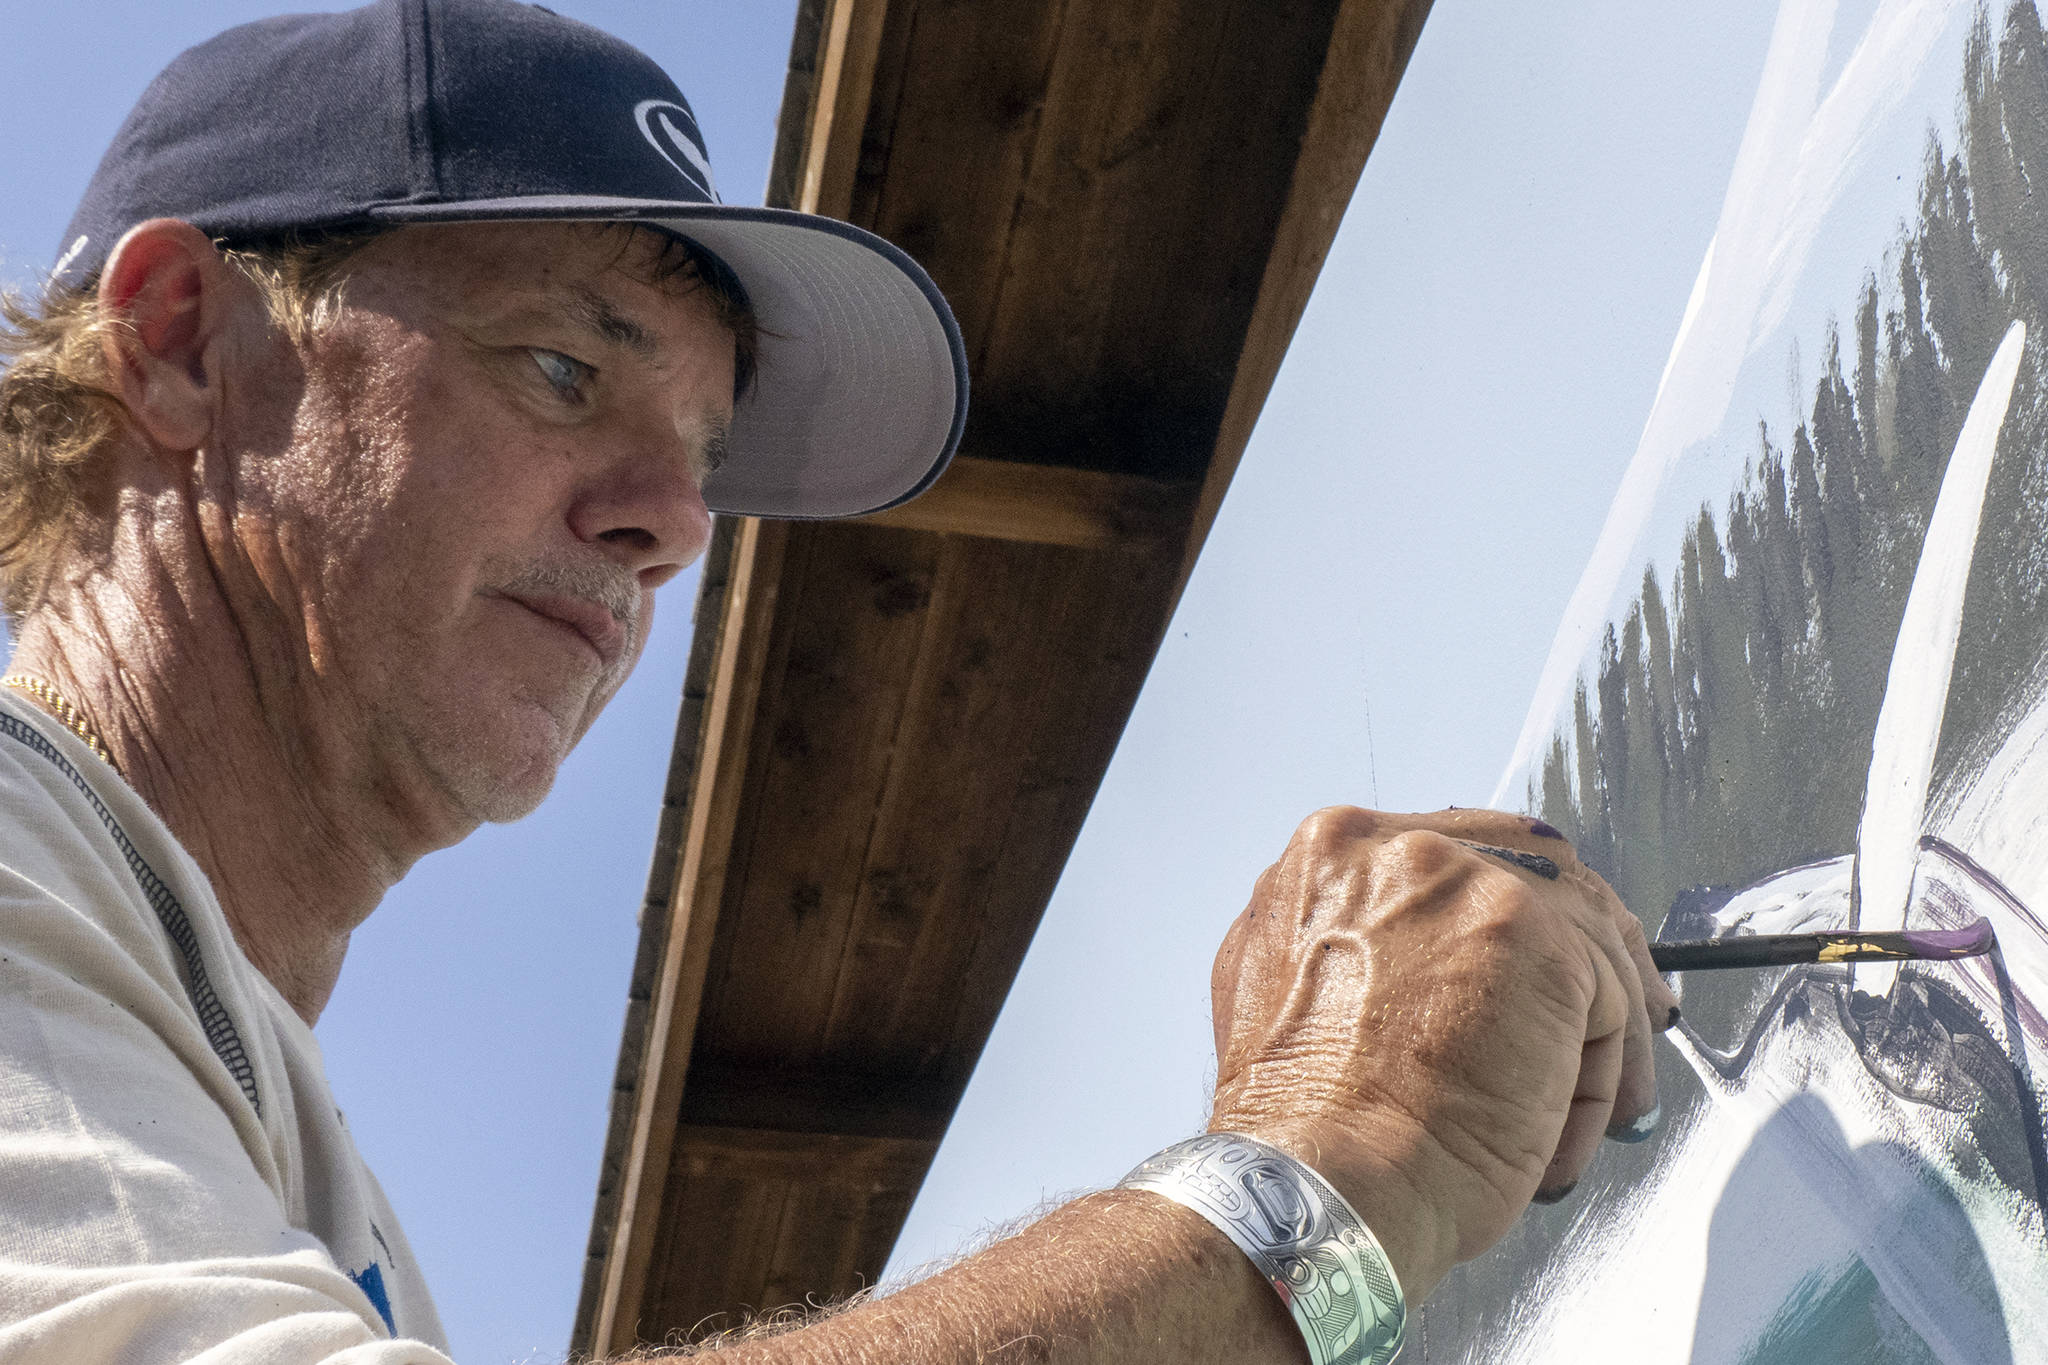 Wyland, an artist based out of Laguna Beach, California, fills in detail while painting a mural at Icy Strait Point, Saturday, Aug. 10. (Courtesy Photo | Icy Strait Point)